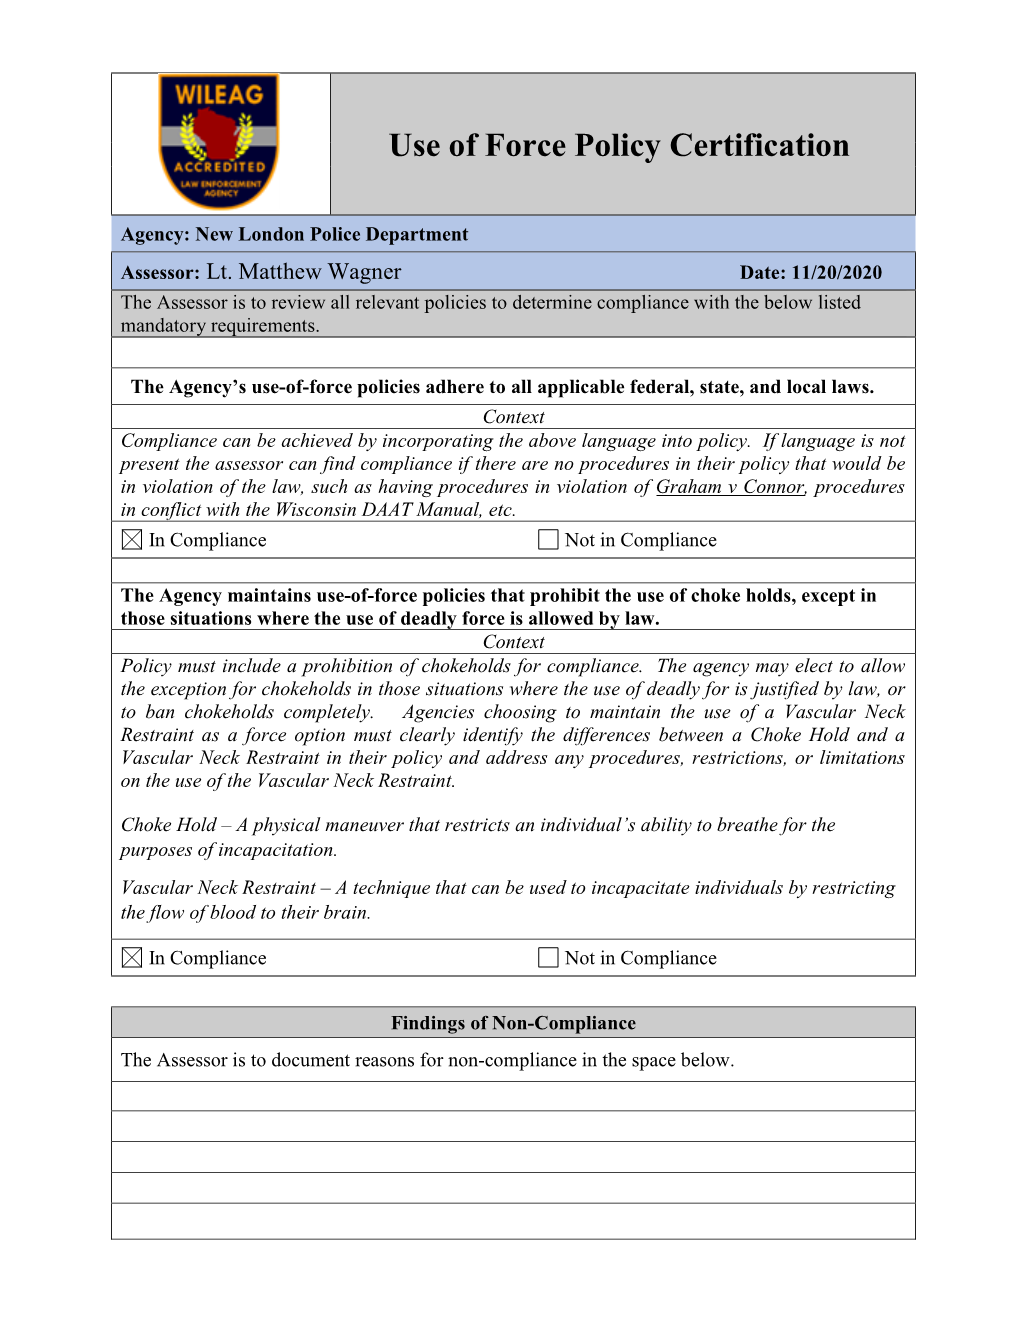 Use of Force Policy Certification